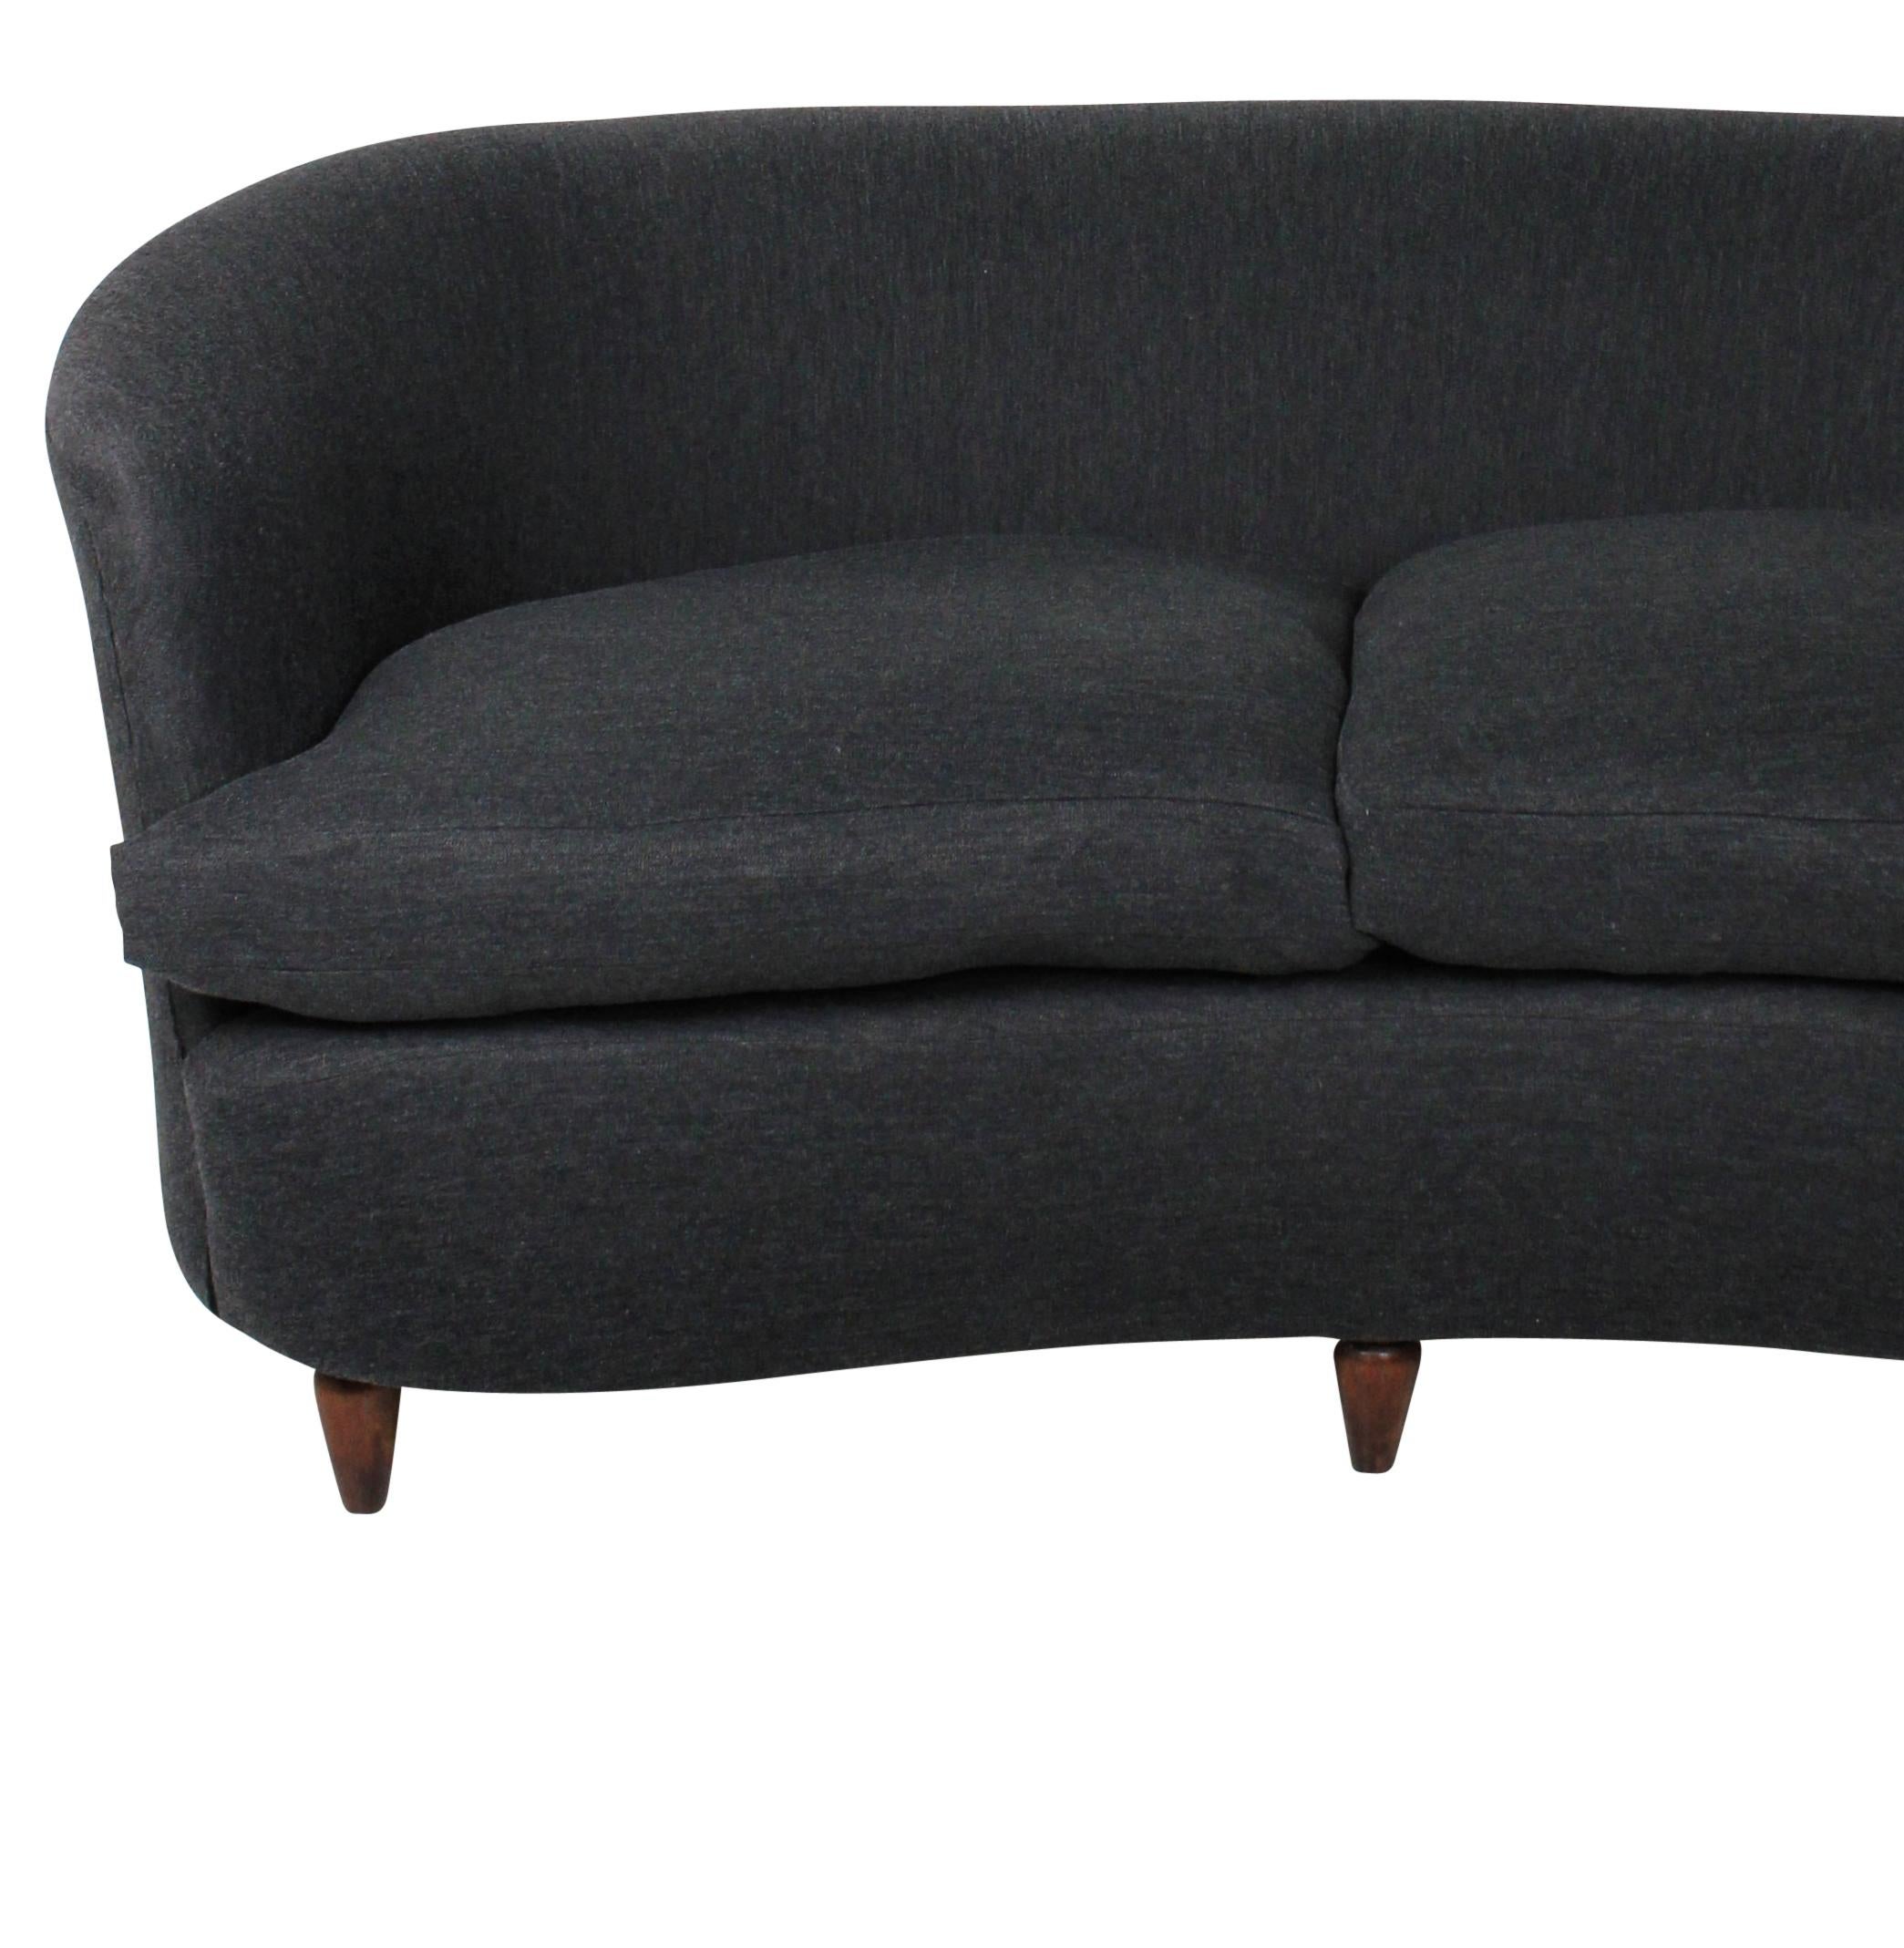 Italian Curved Two-Seat Sofa by Parisi